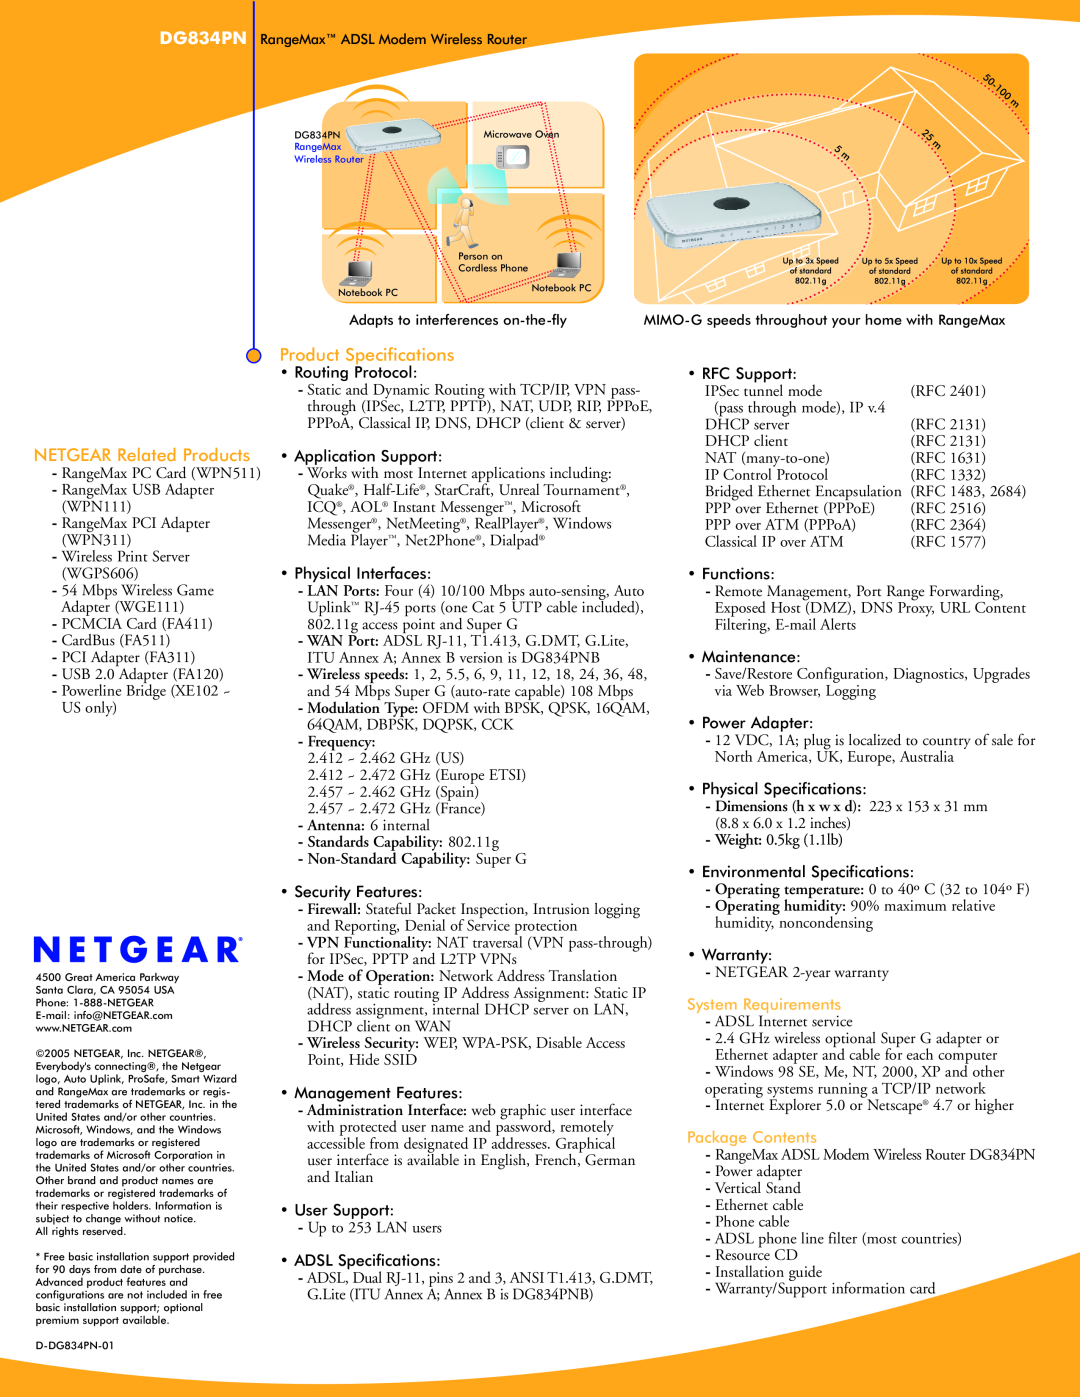 NETGEAR DG834PN manual Product Specifications, NETGEAR Related Products, Frequency, System Requirements, Package Contents 